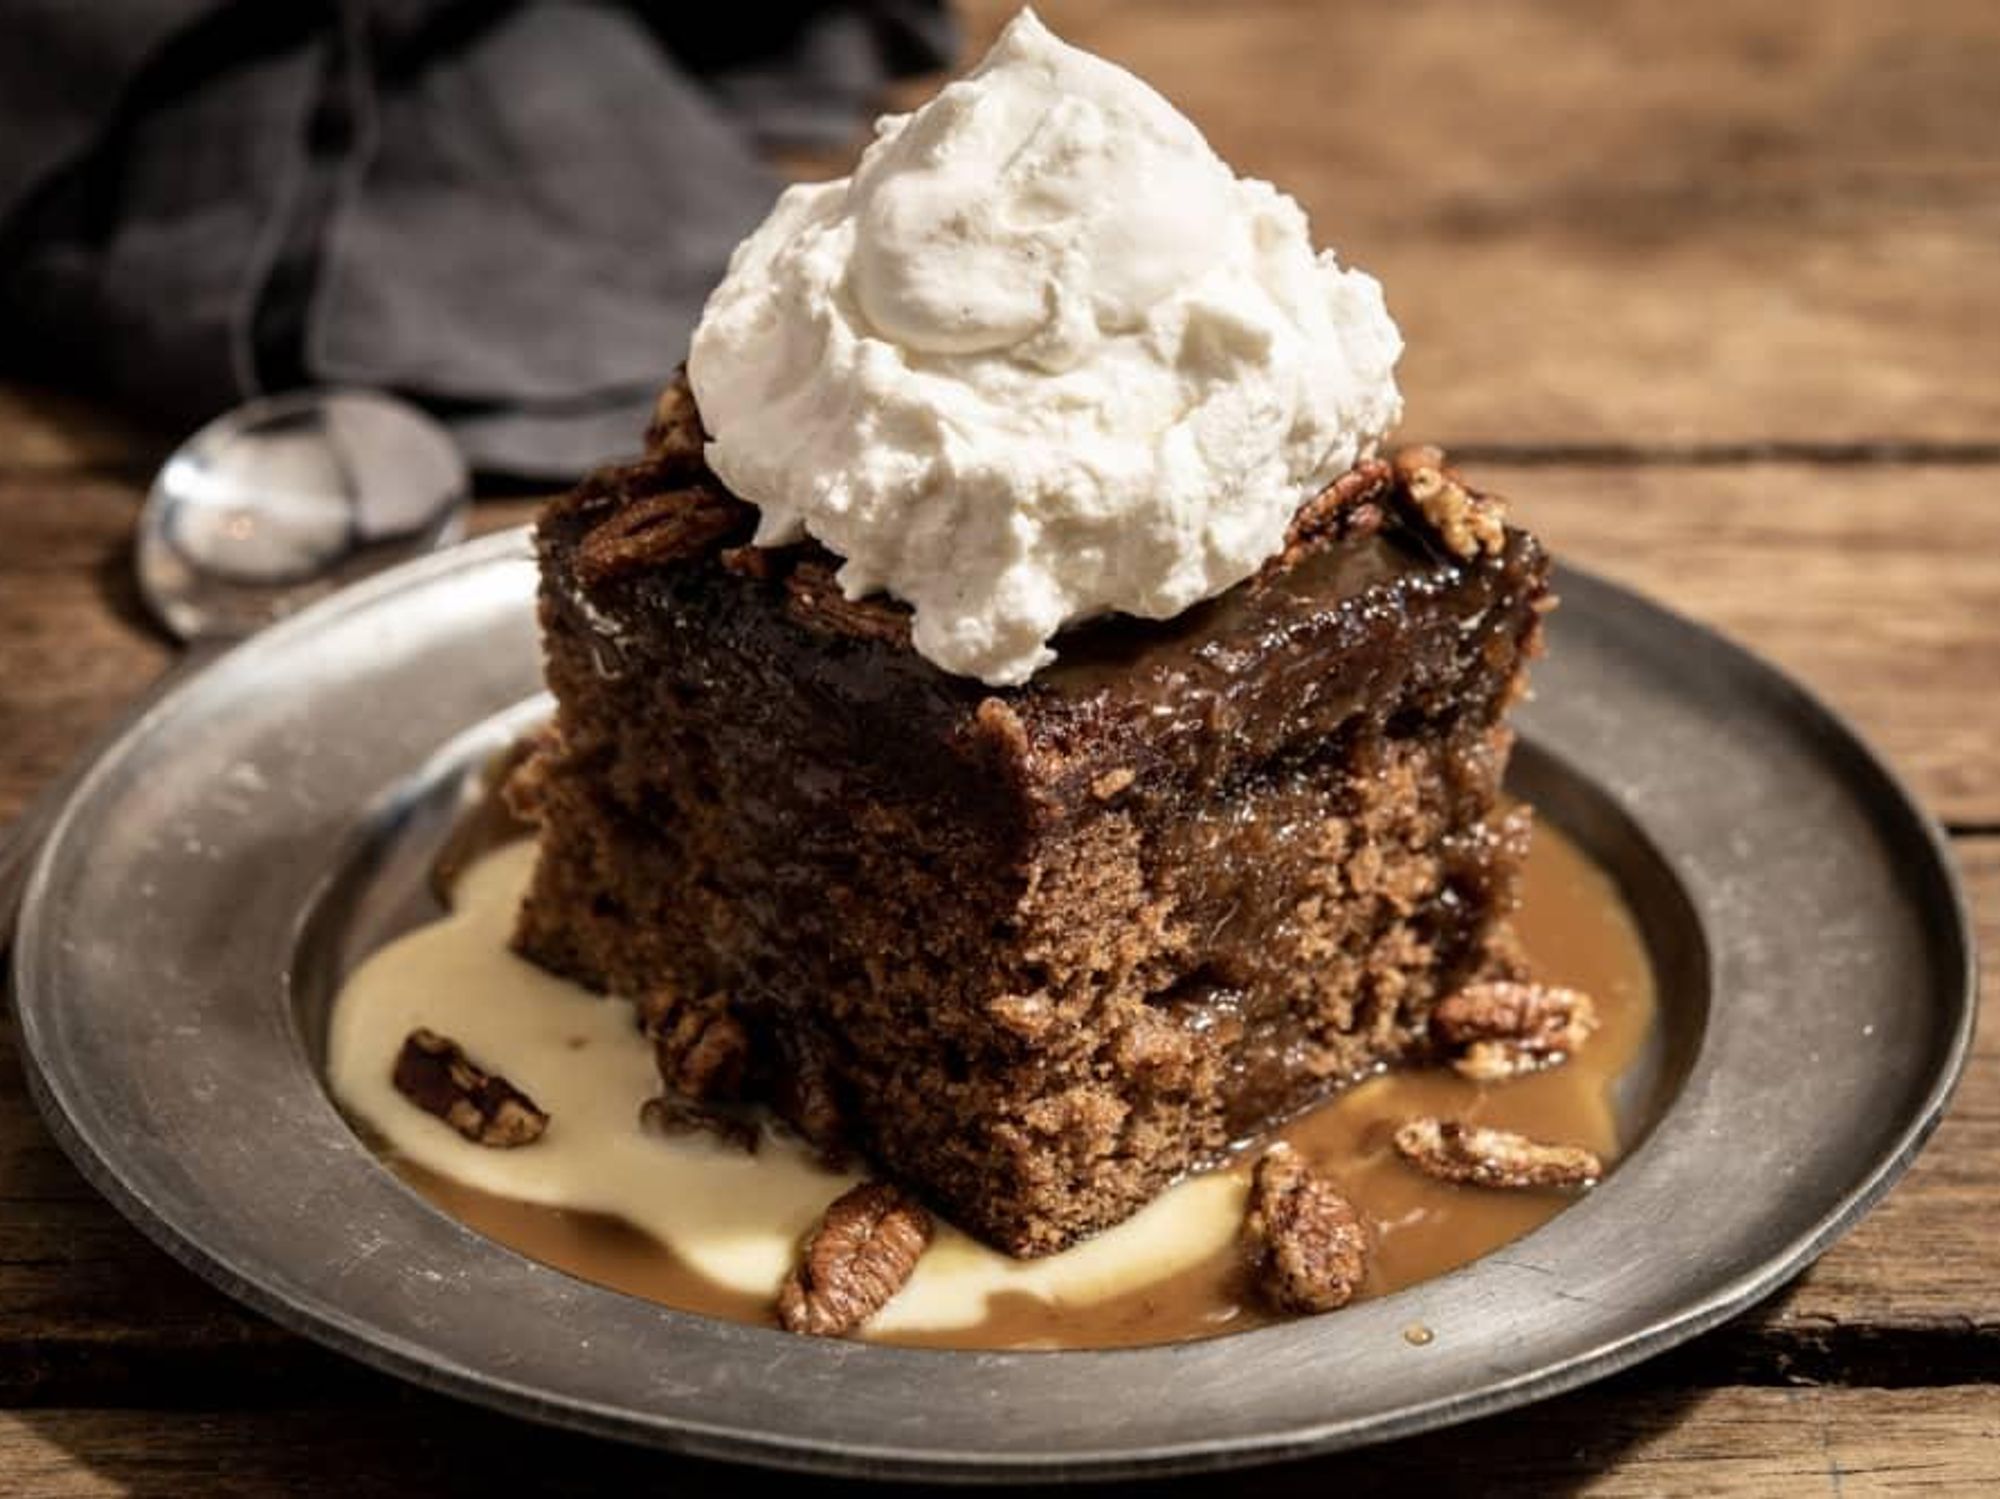 Whiskey cake by Whiskey Cake coming to Round Rock